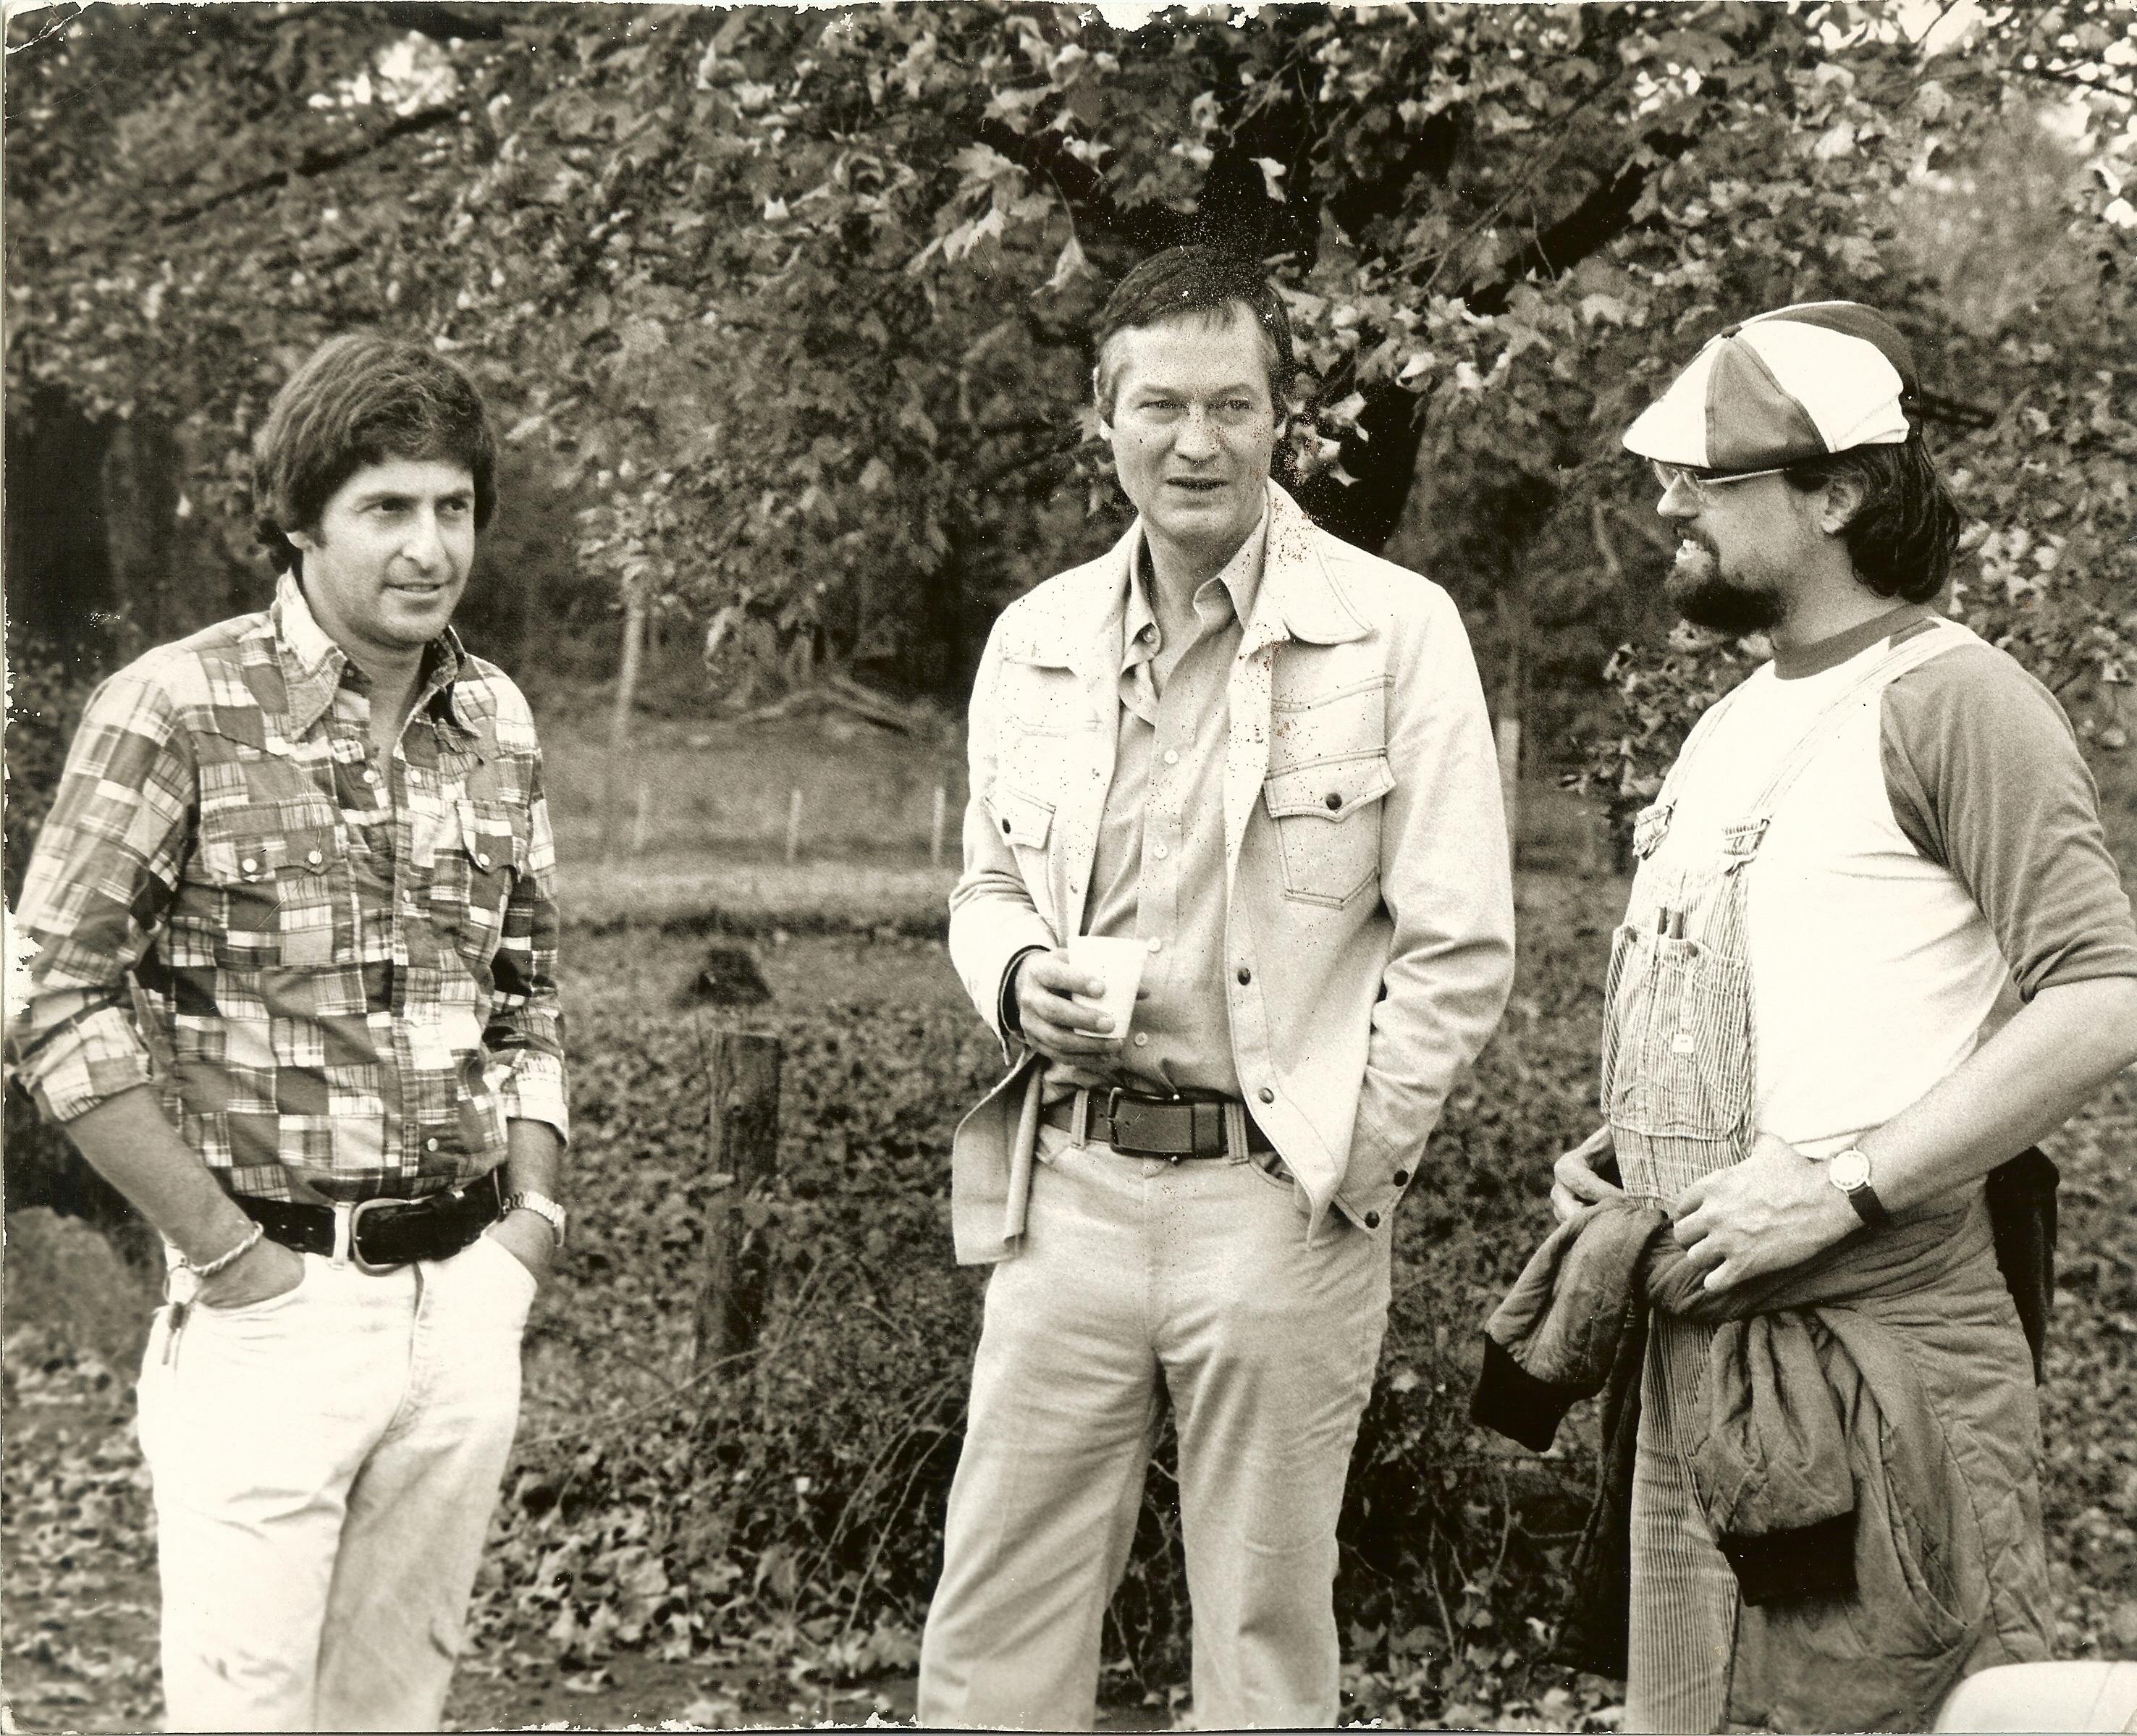 From left to right: Paul Rapp, Roger Corman and Jonathan Demme. On location in Arkansas for 20th Century Fox's 